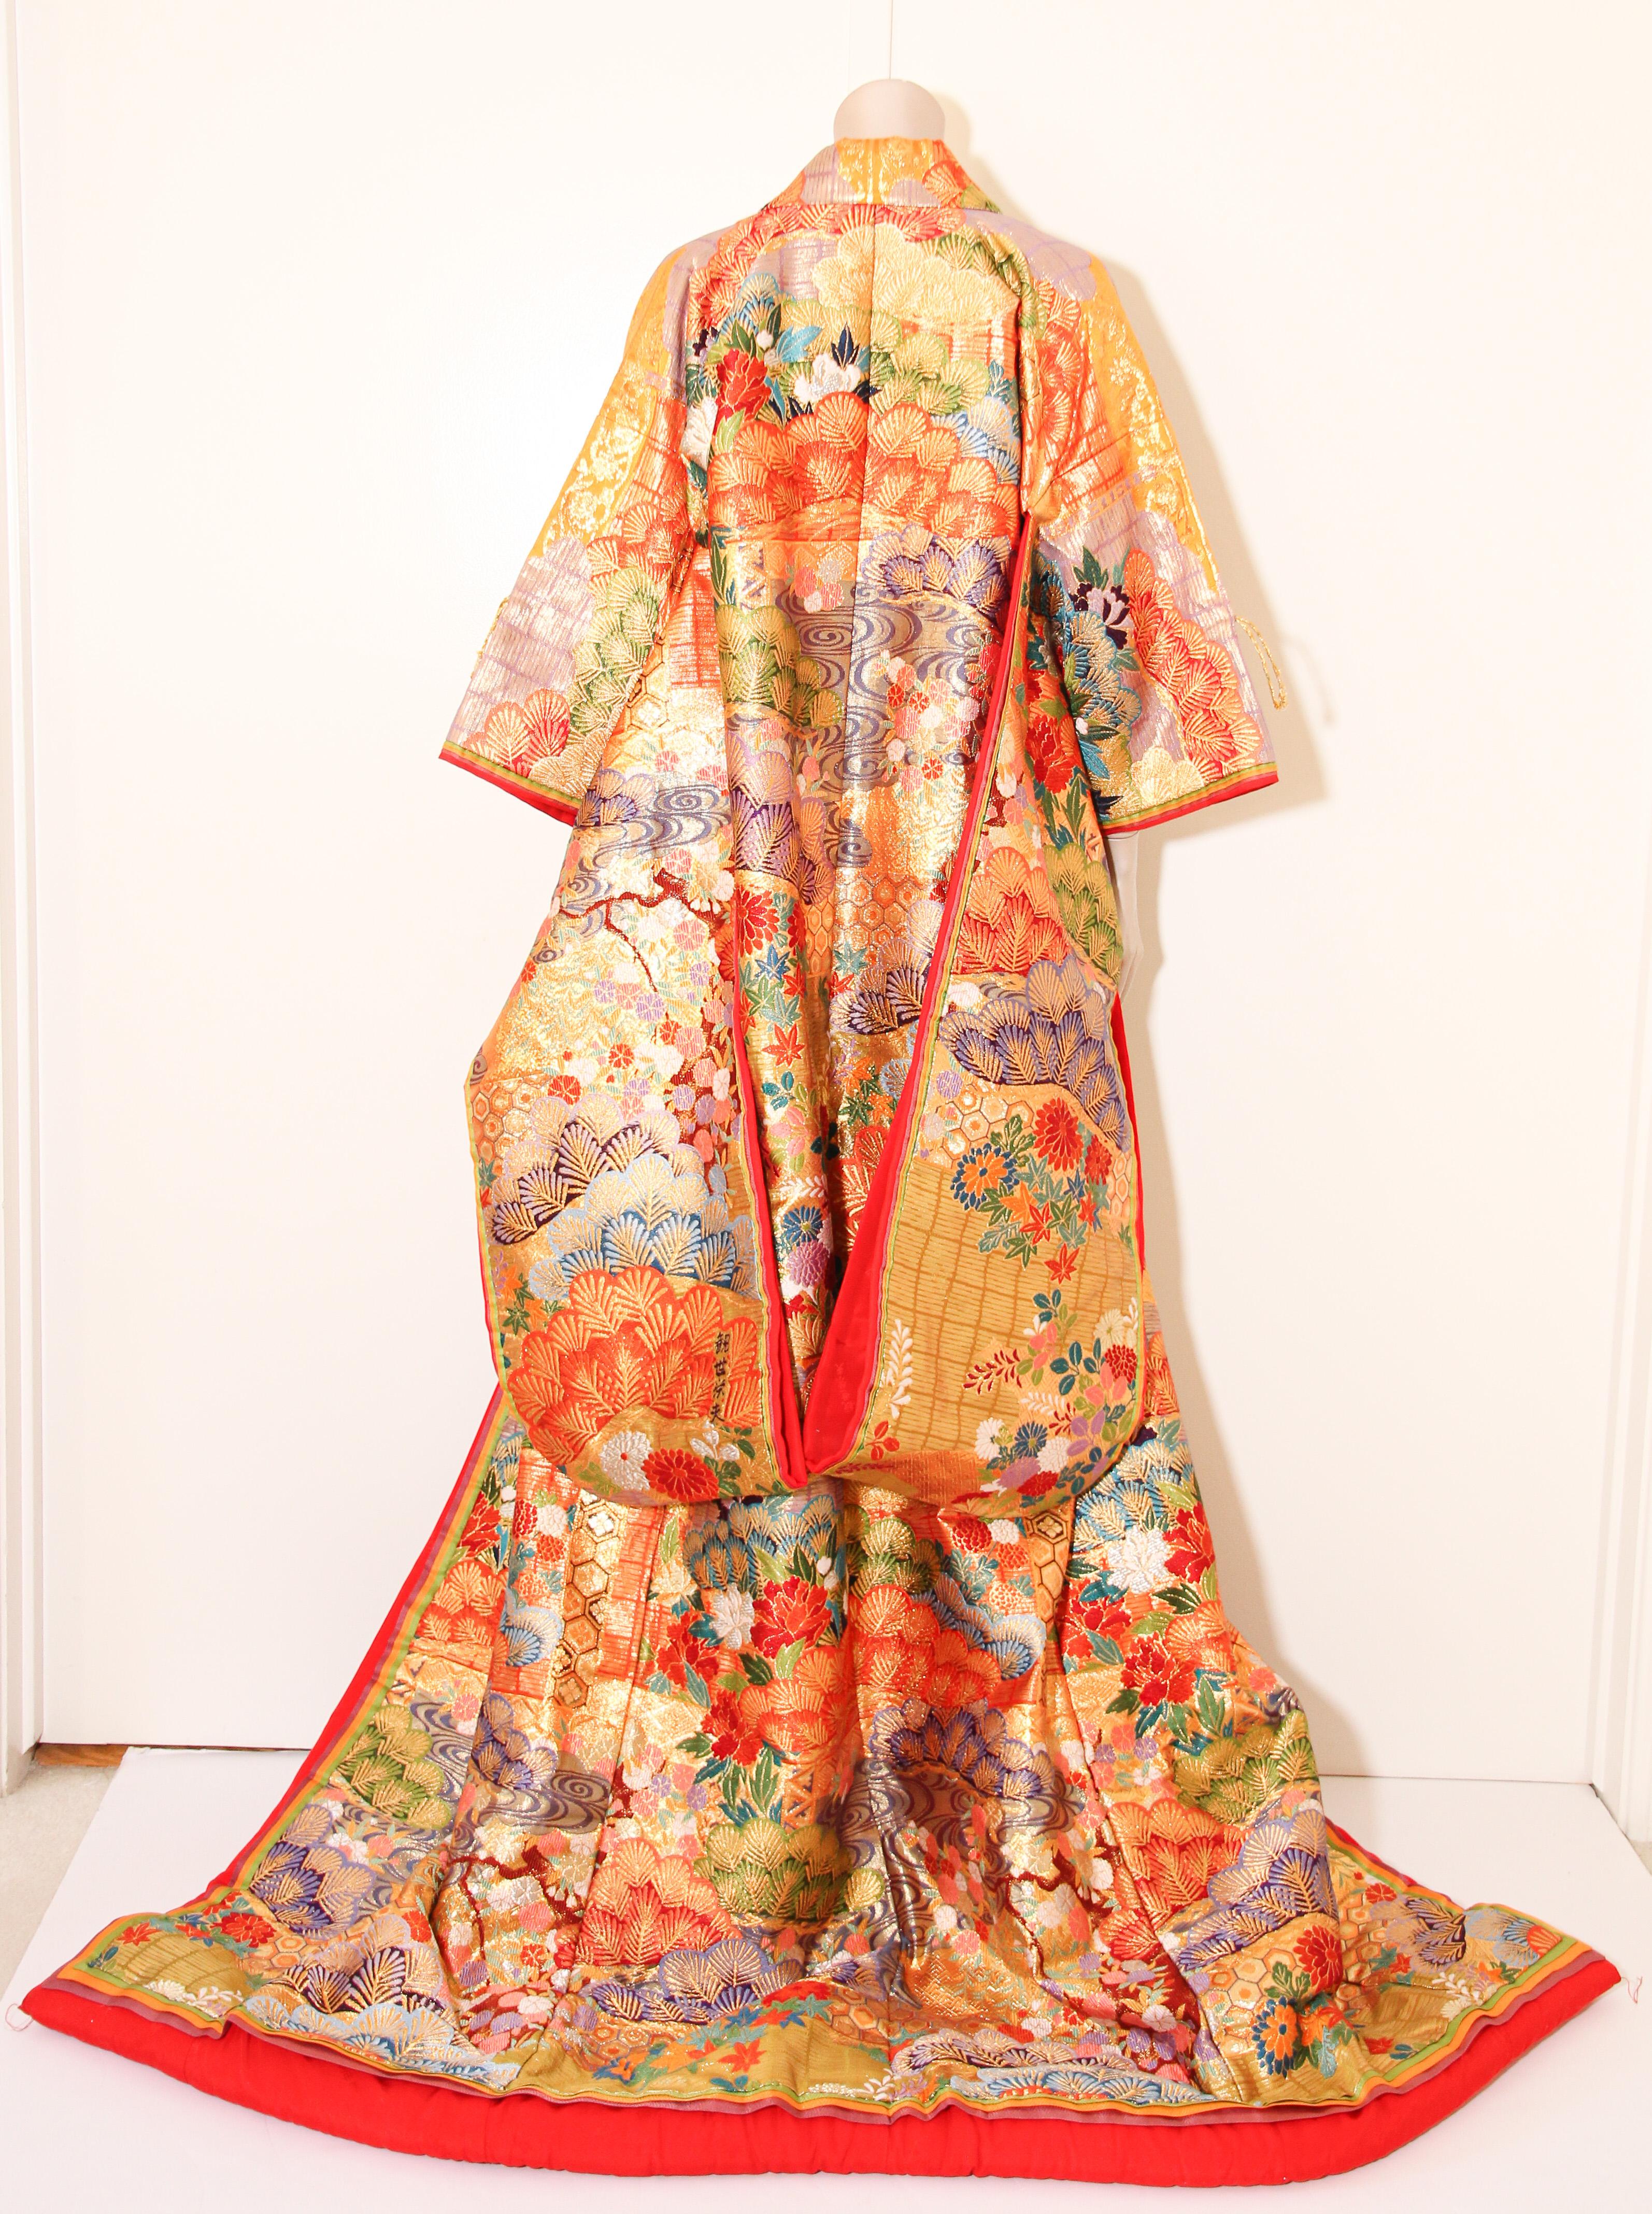 A vintage color silk brocade collectable Japanese ceremonial wedding kimono. 
Vintage heavy, signed by the maker, one of a kind handcrafted.
Fabulous museum quality ceremonial piece in pure silk with intricate detailed hand-embroidery throughout,